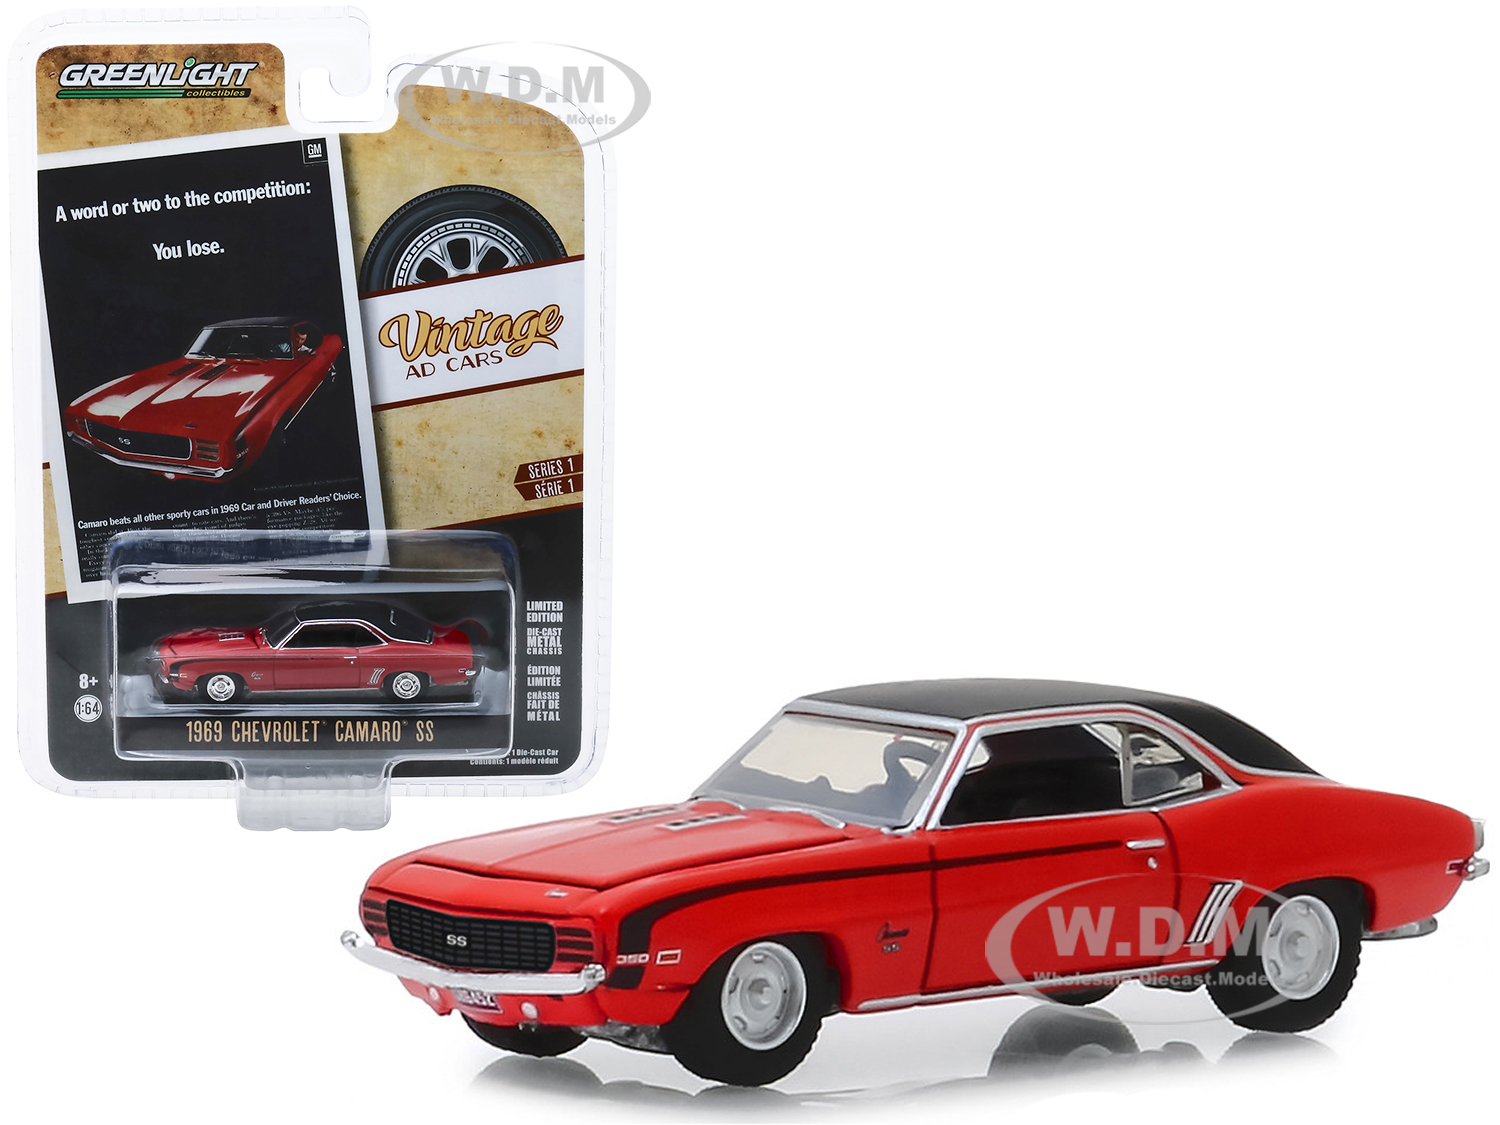 1969 Chevrolet Camaro Ss Red With Black Top "a Word Or Two To The Competition You Lose." "vintage Ad Cars" Series 1 1/64 Diecast Model Car By Greenli